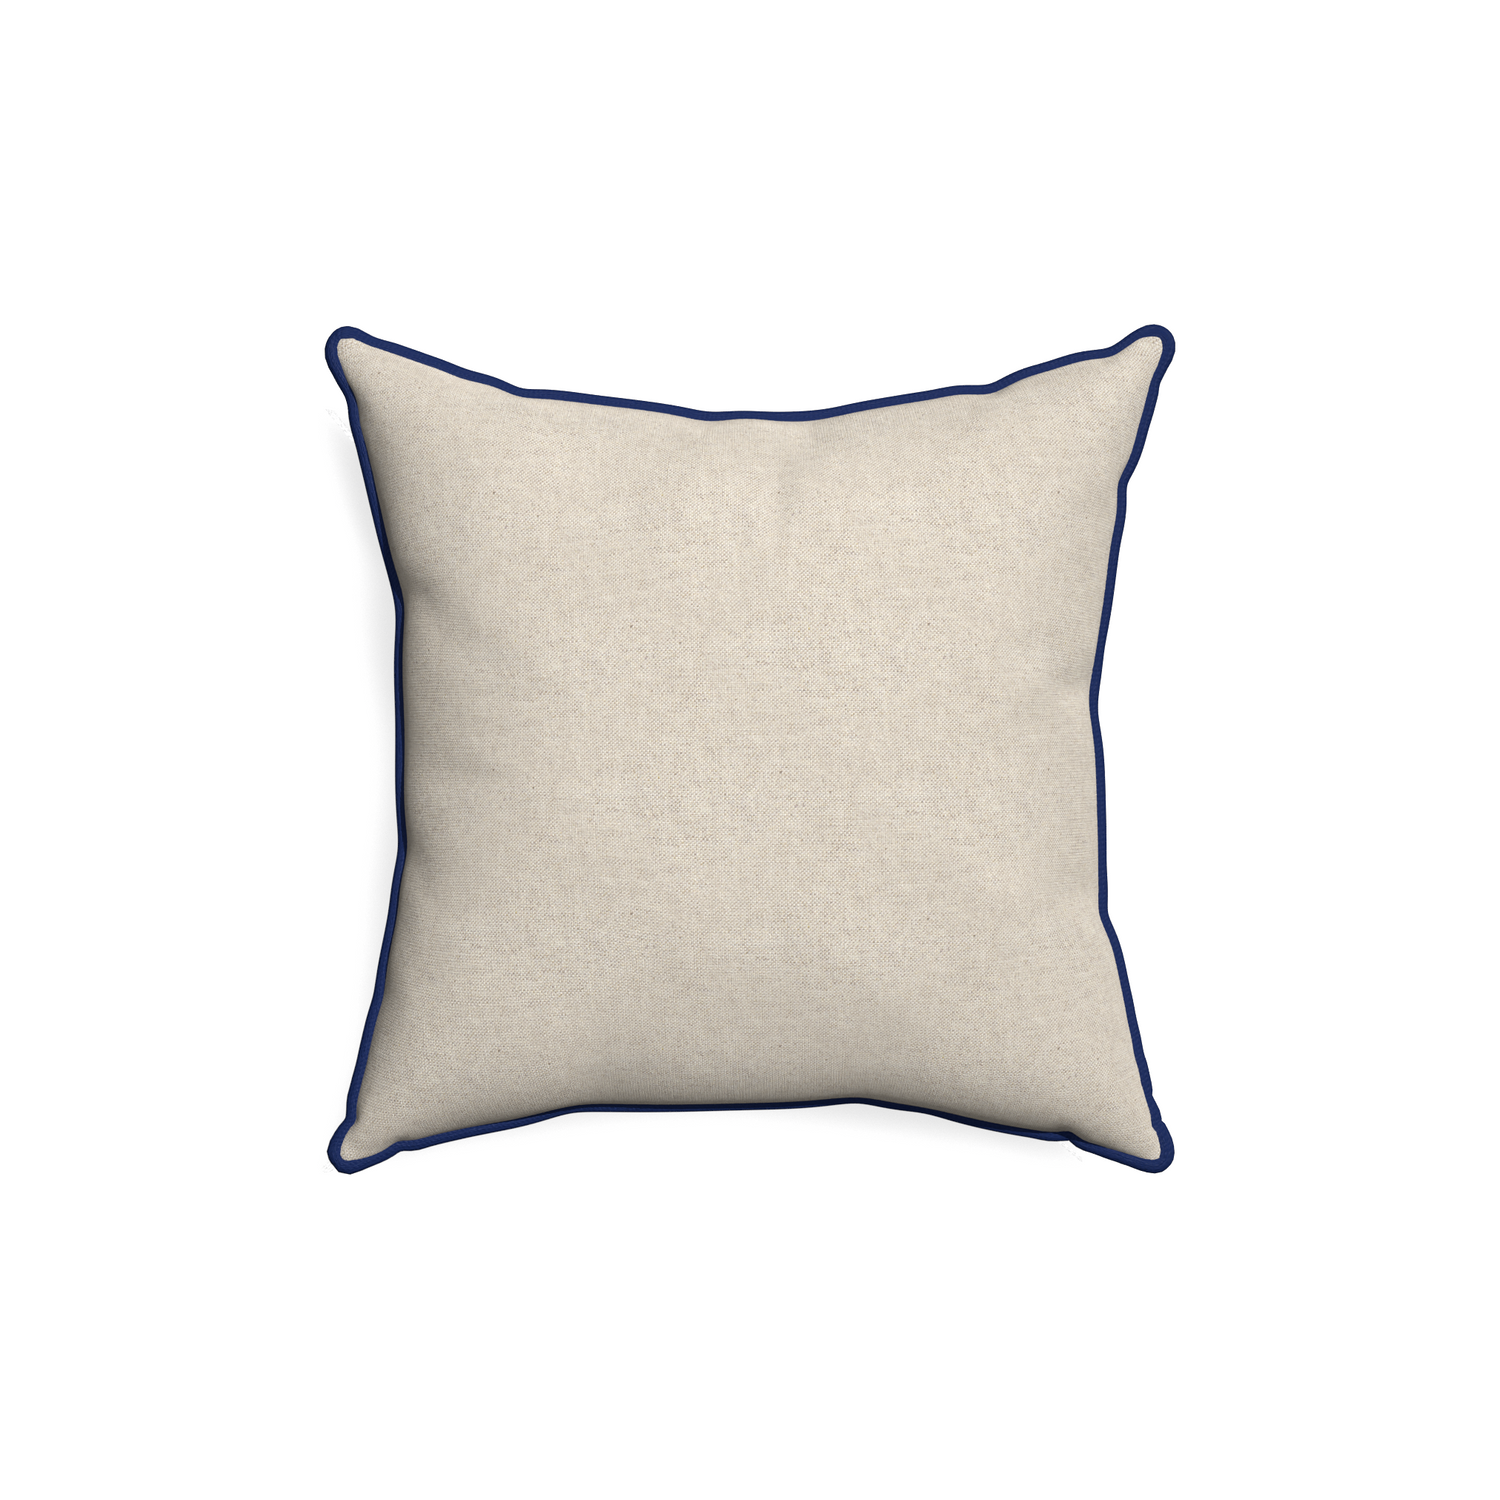 18-square oat custom light brownpillow with midnight piping on white background